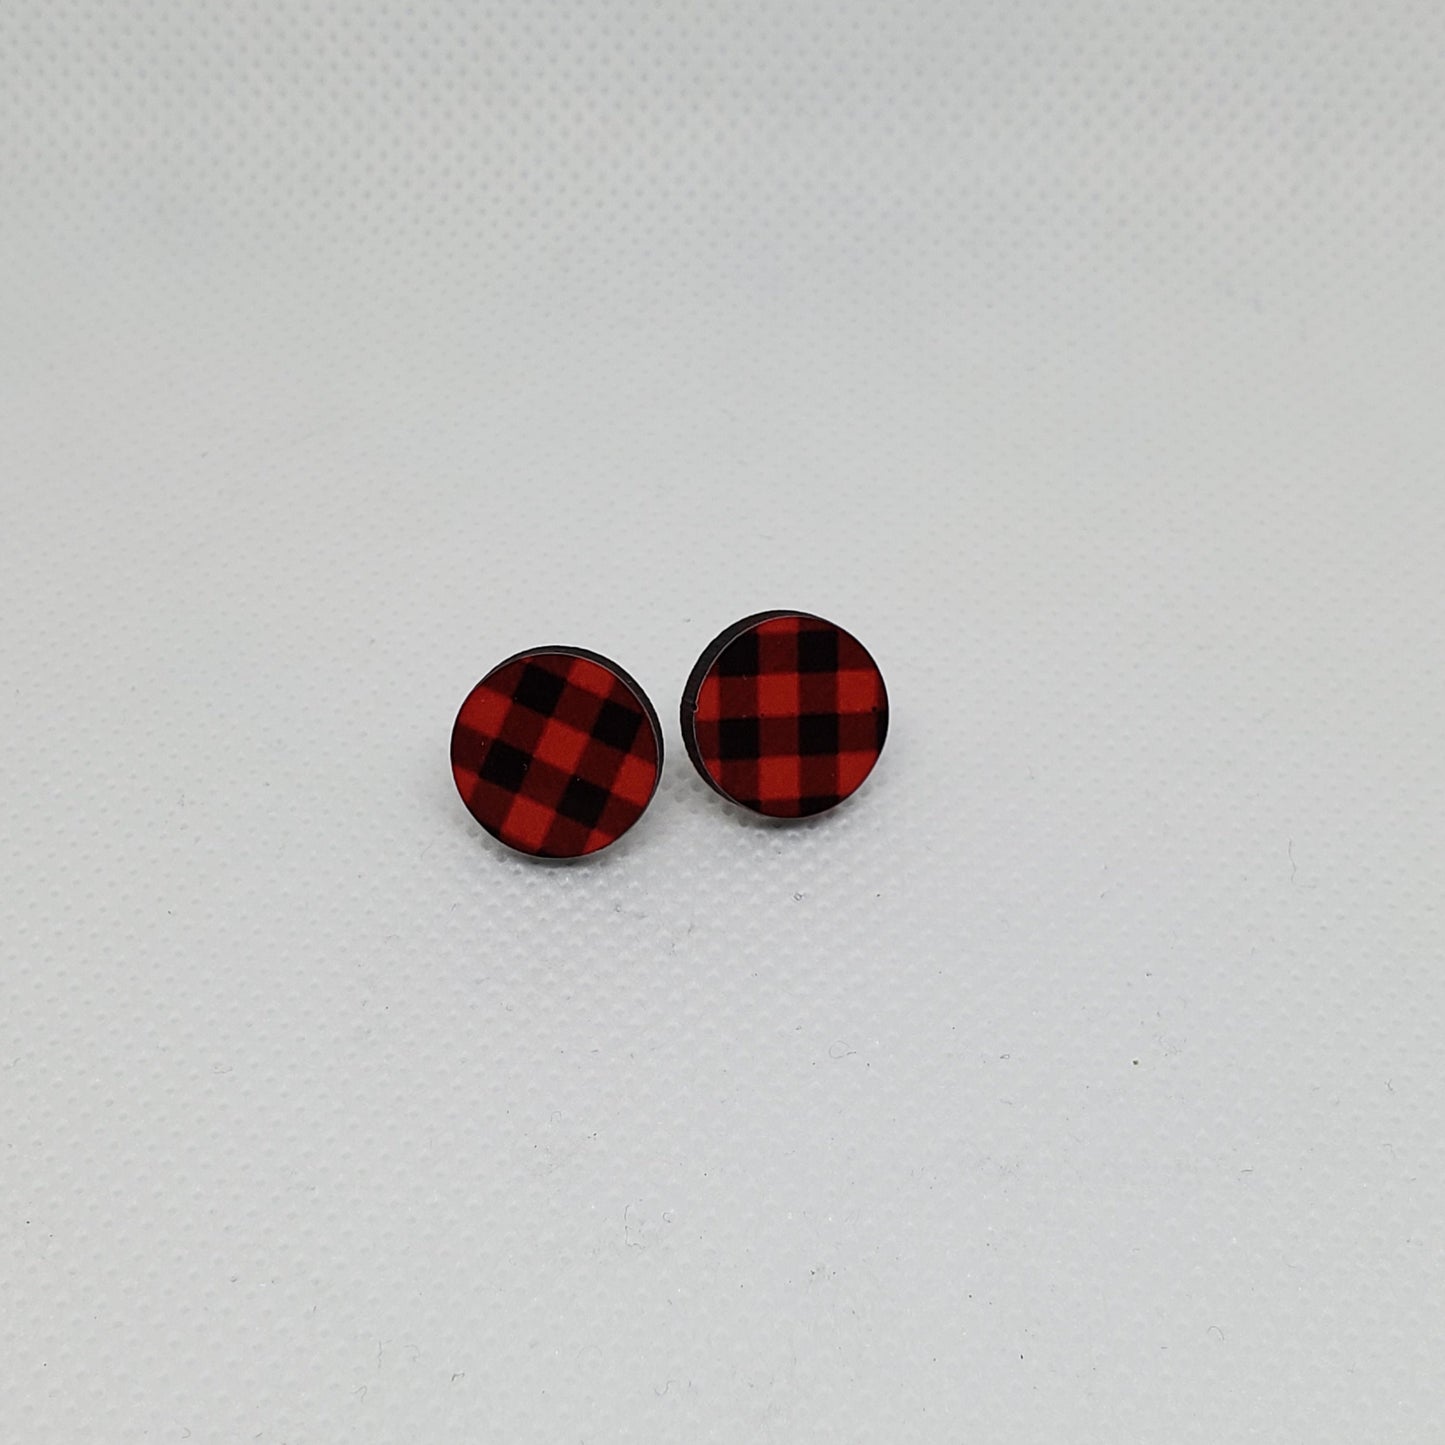 Sublimation hardboard blanks, 0.5 inch round sublimation blanks, half inch round stud earring blanks for sublimation, with or without holes